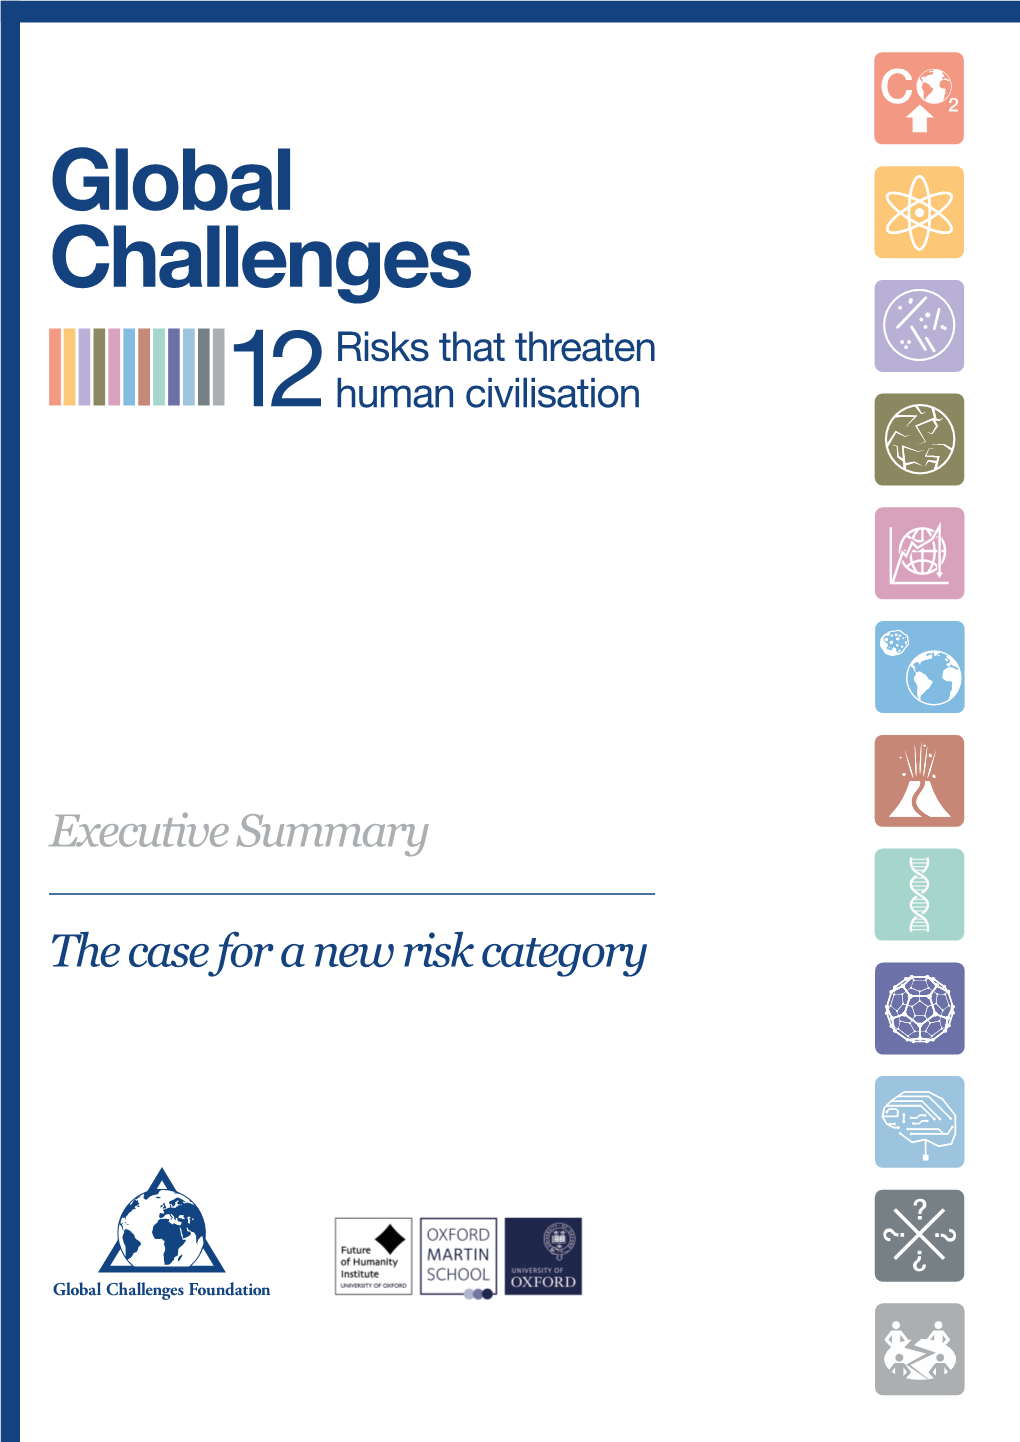 Global Challenges Foundation Works to Raise Awareness of the Greatest Threats the Idea That We Face a Number of Global Challenges Facing Humanity